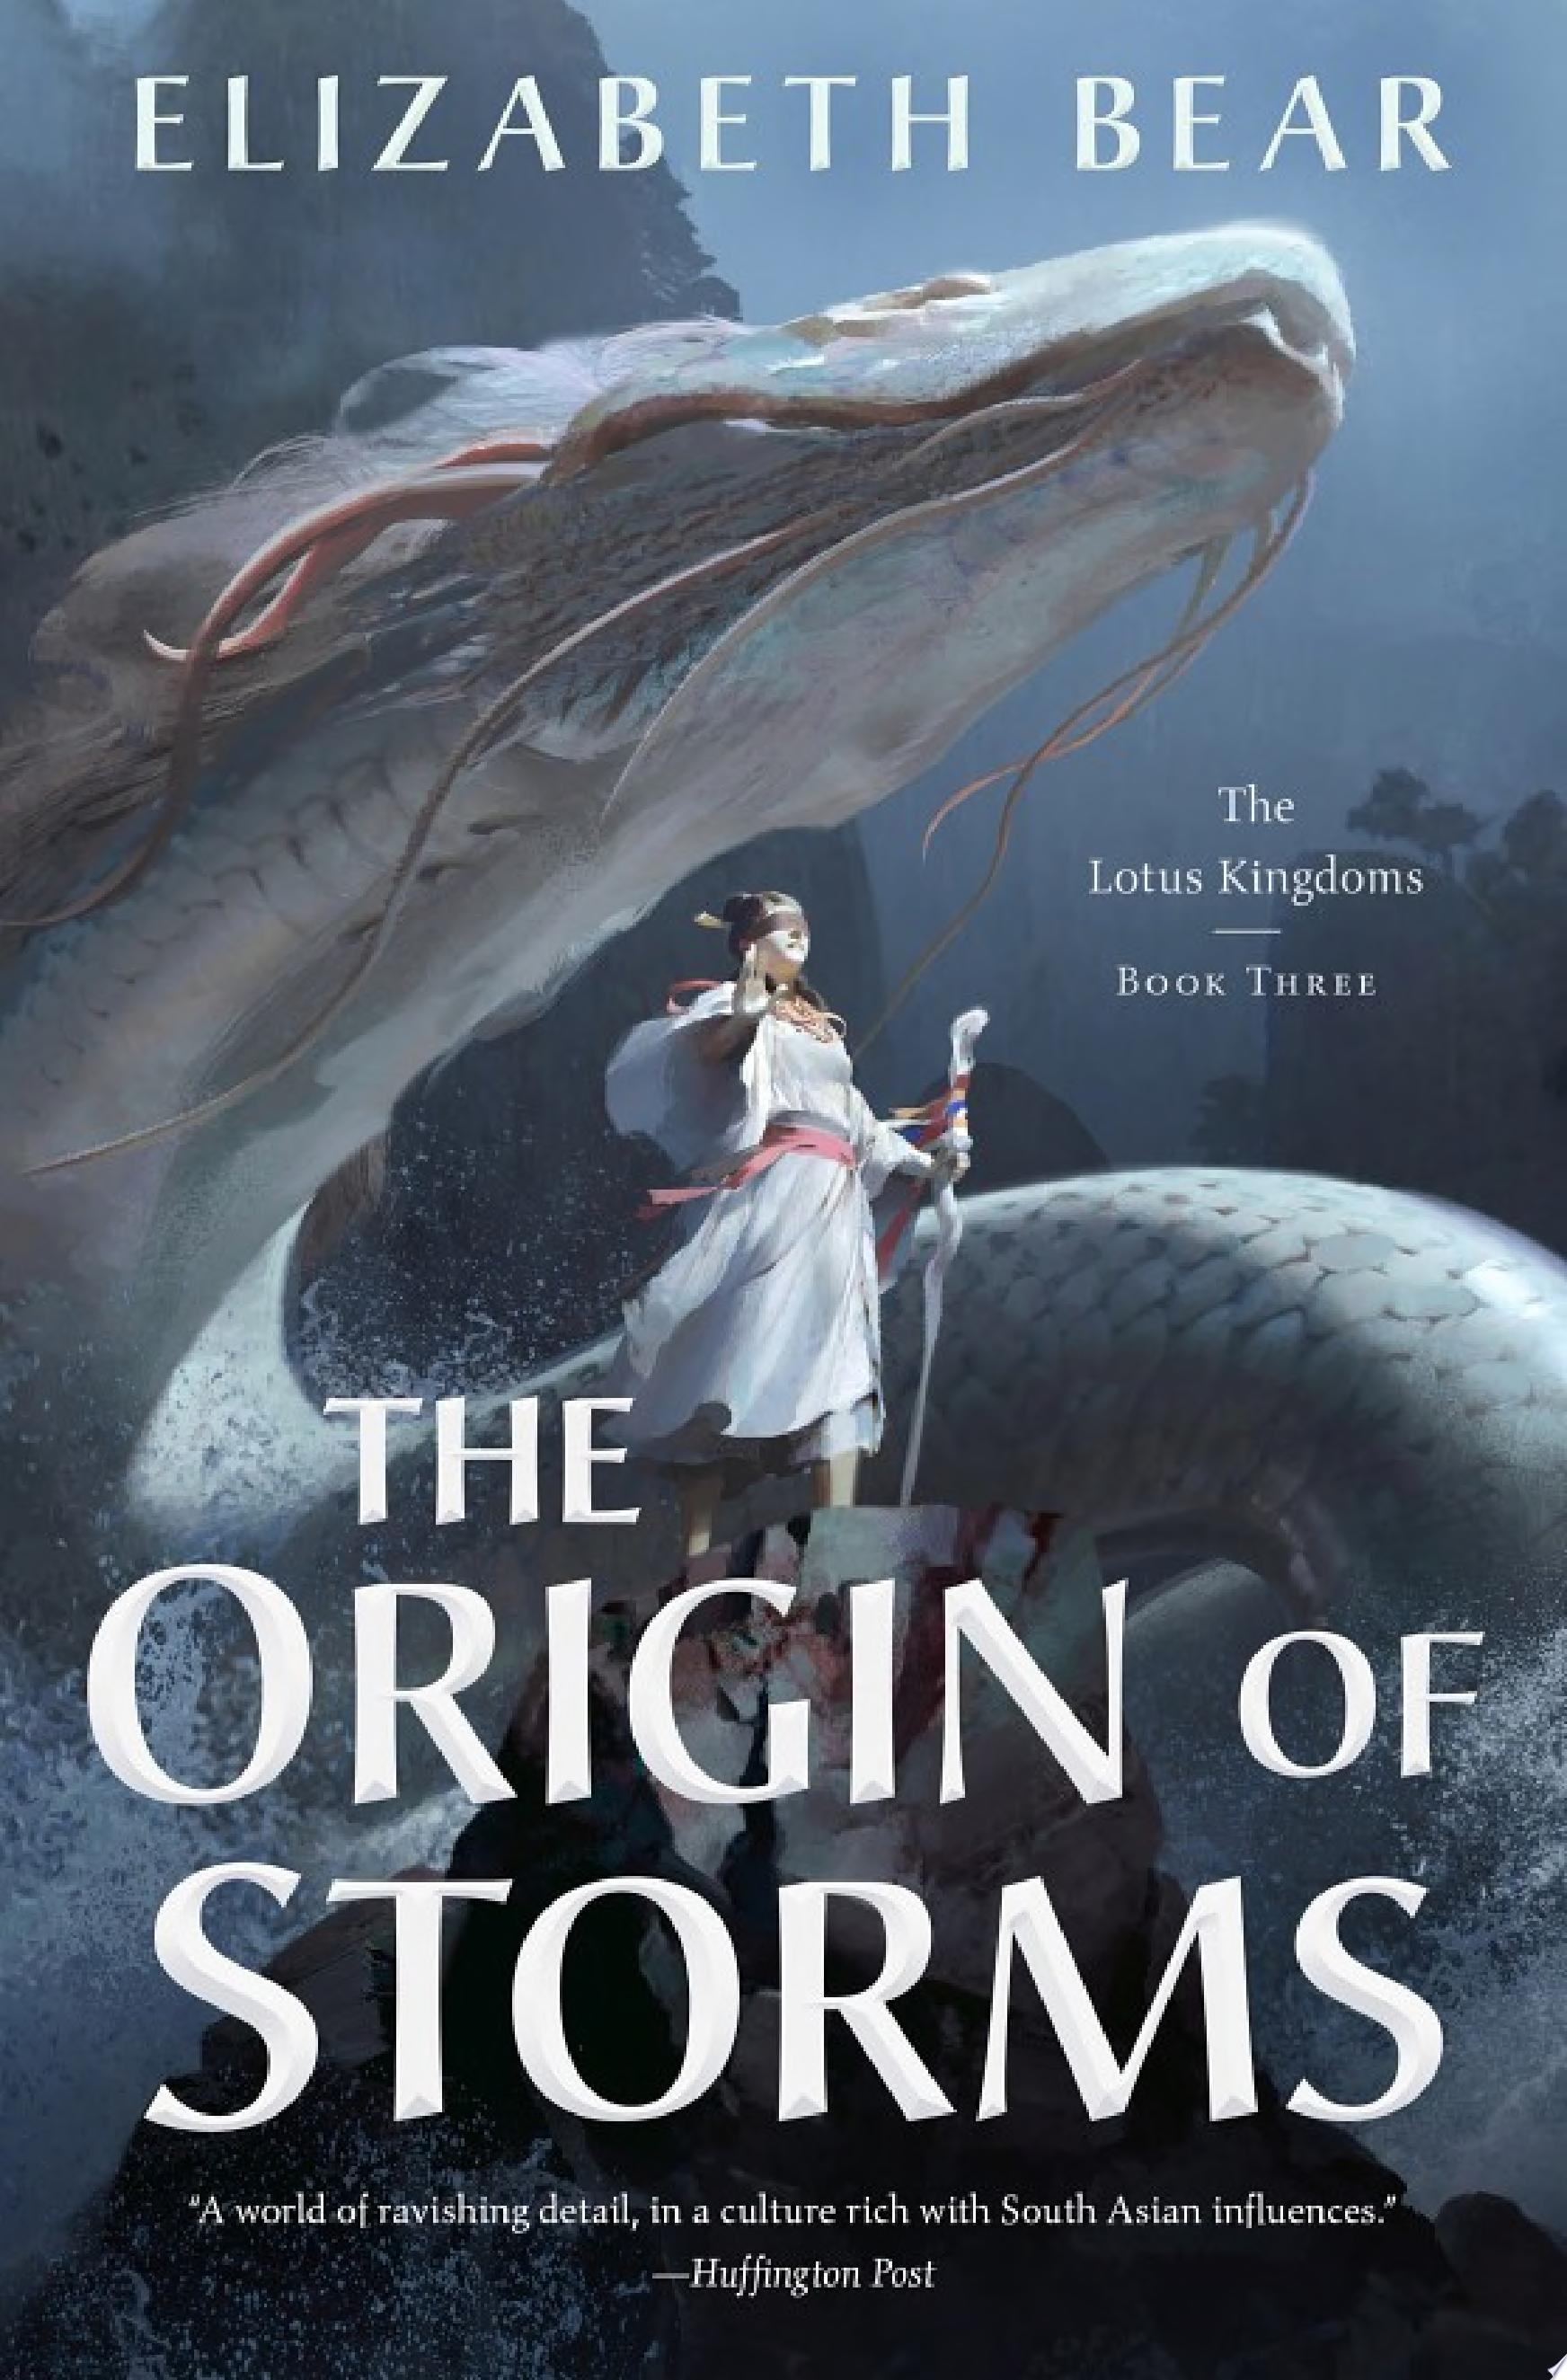 Image for "The Origin of Storms"